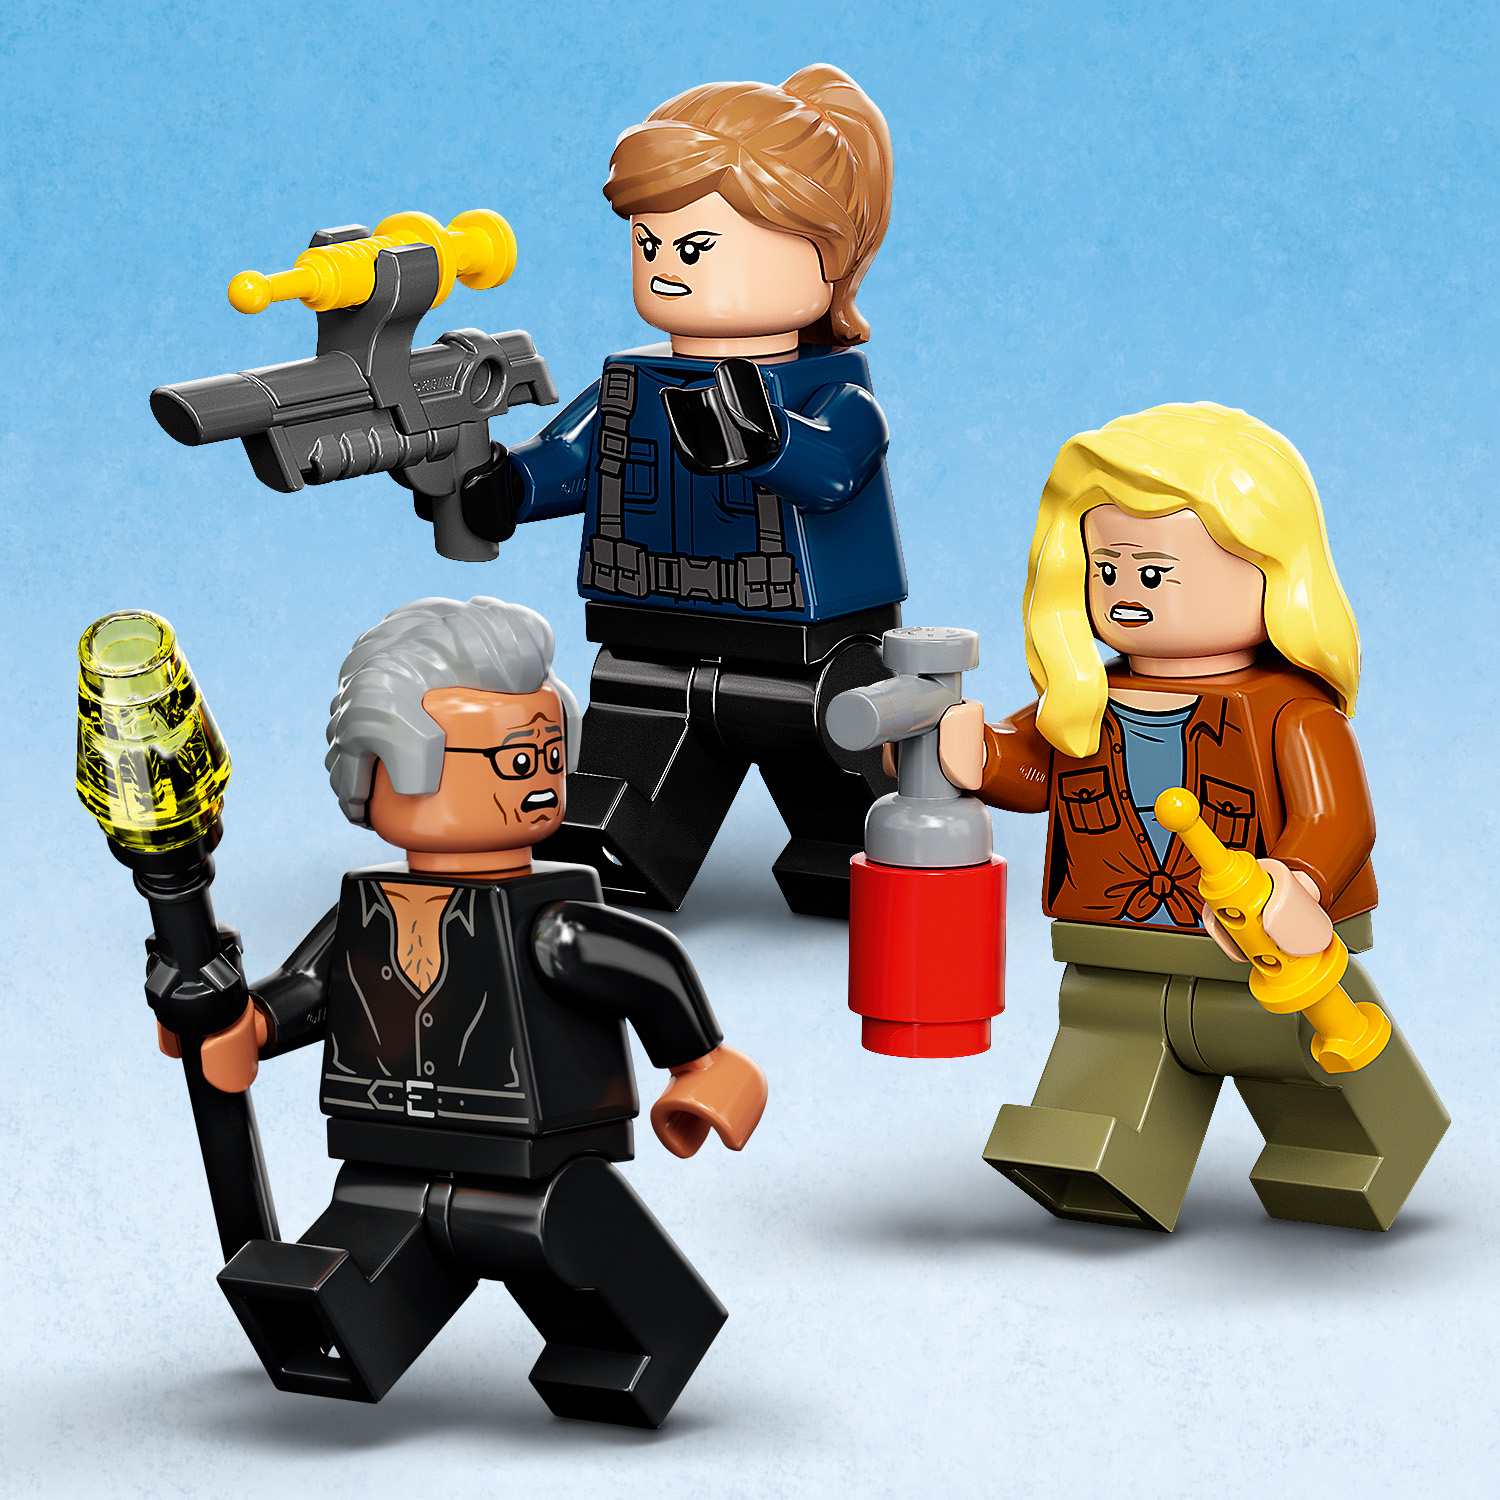 3 minifigures for role play